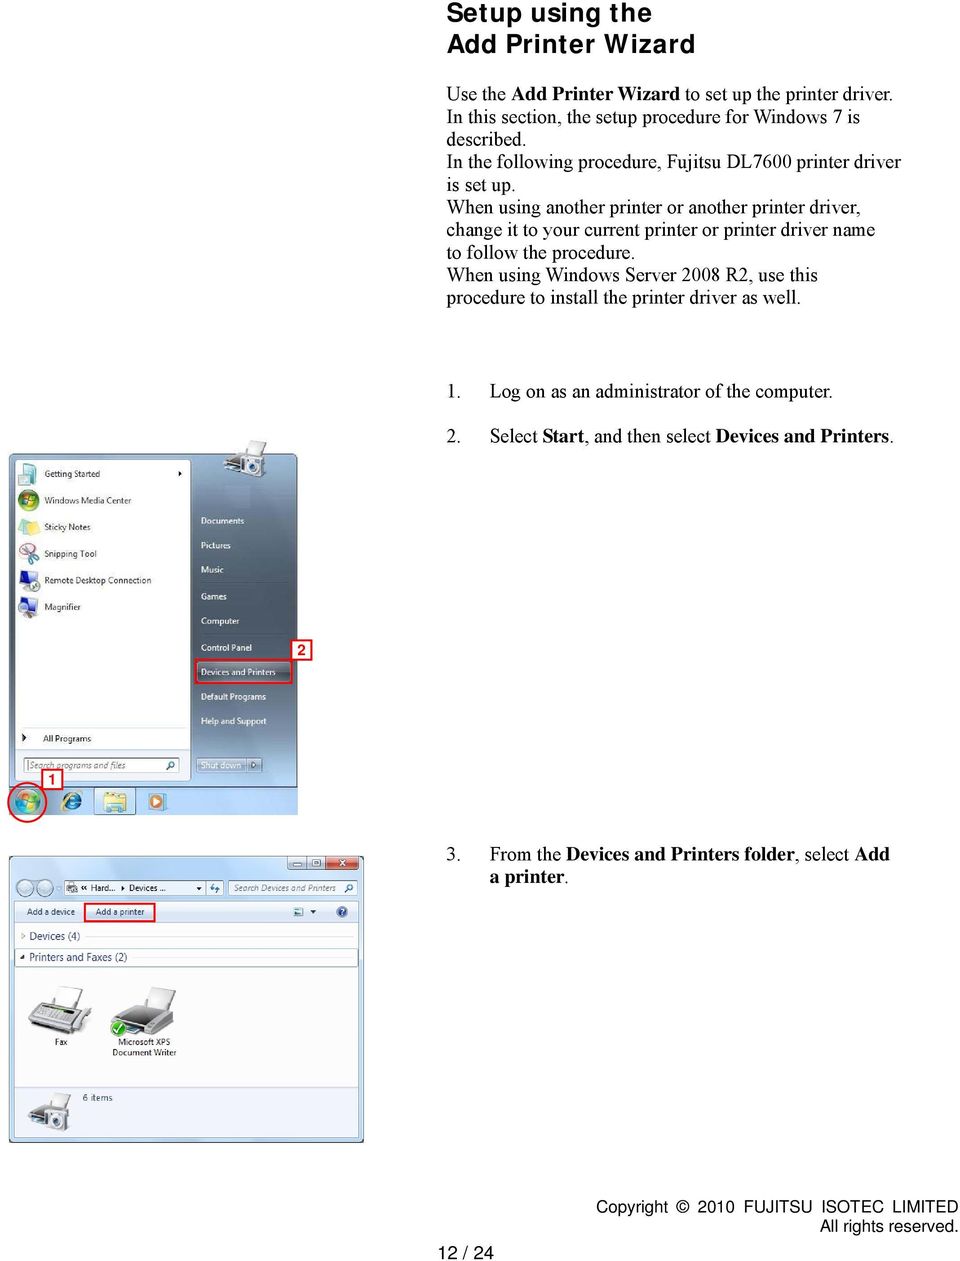 When using another printer or another printer driver, change it to your current printer or printer driver name to follow the procedure.